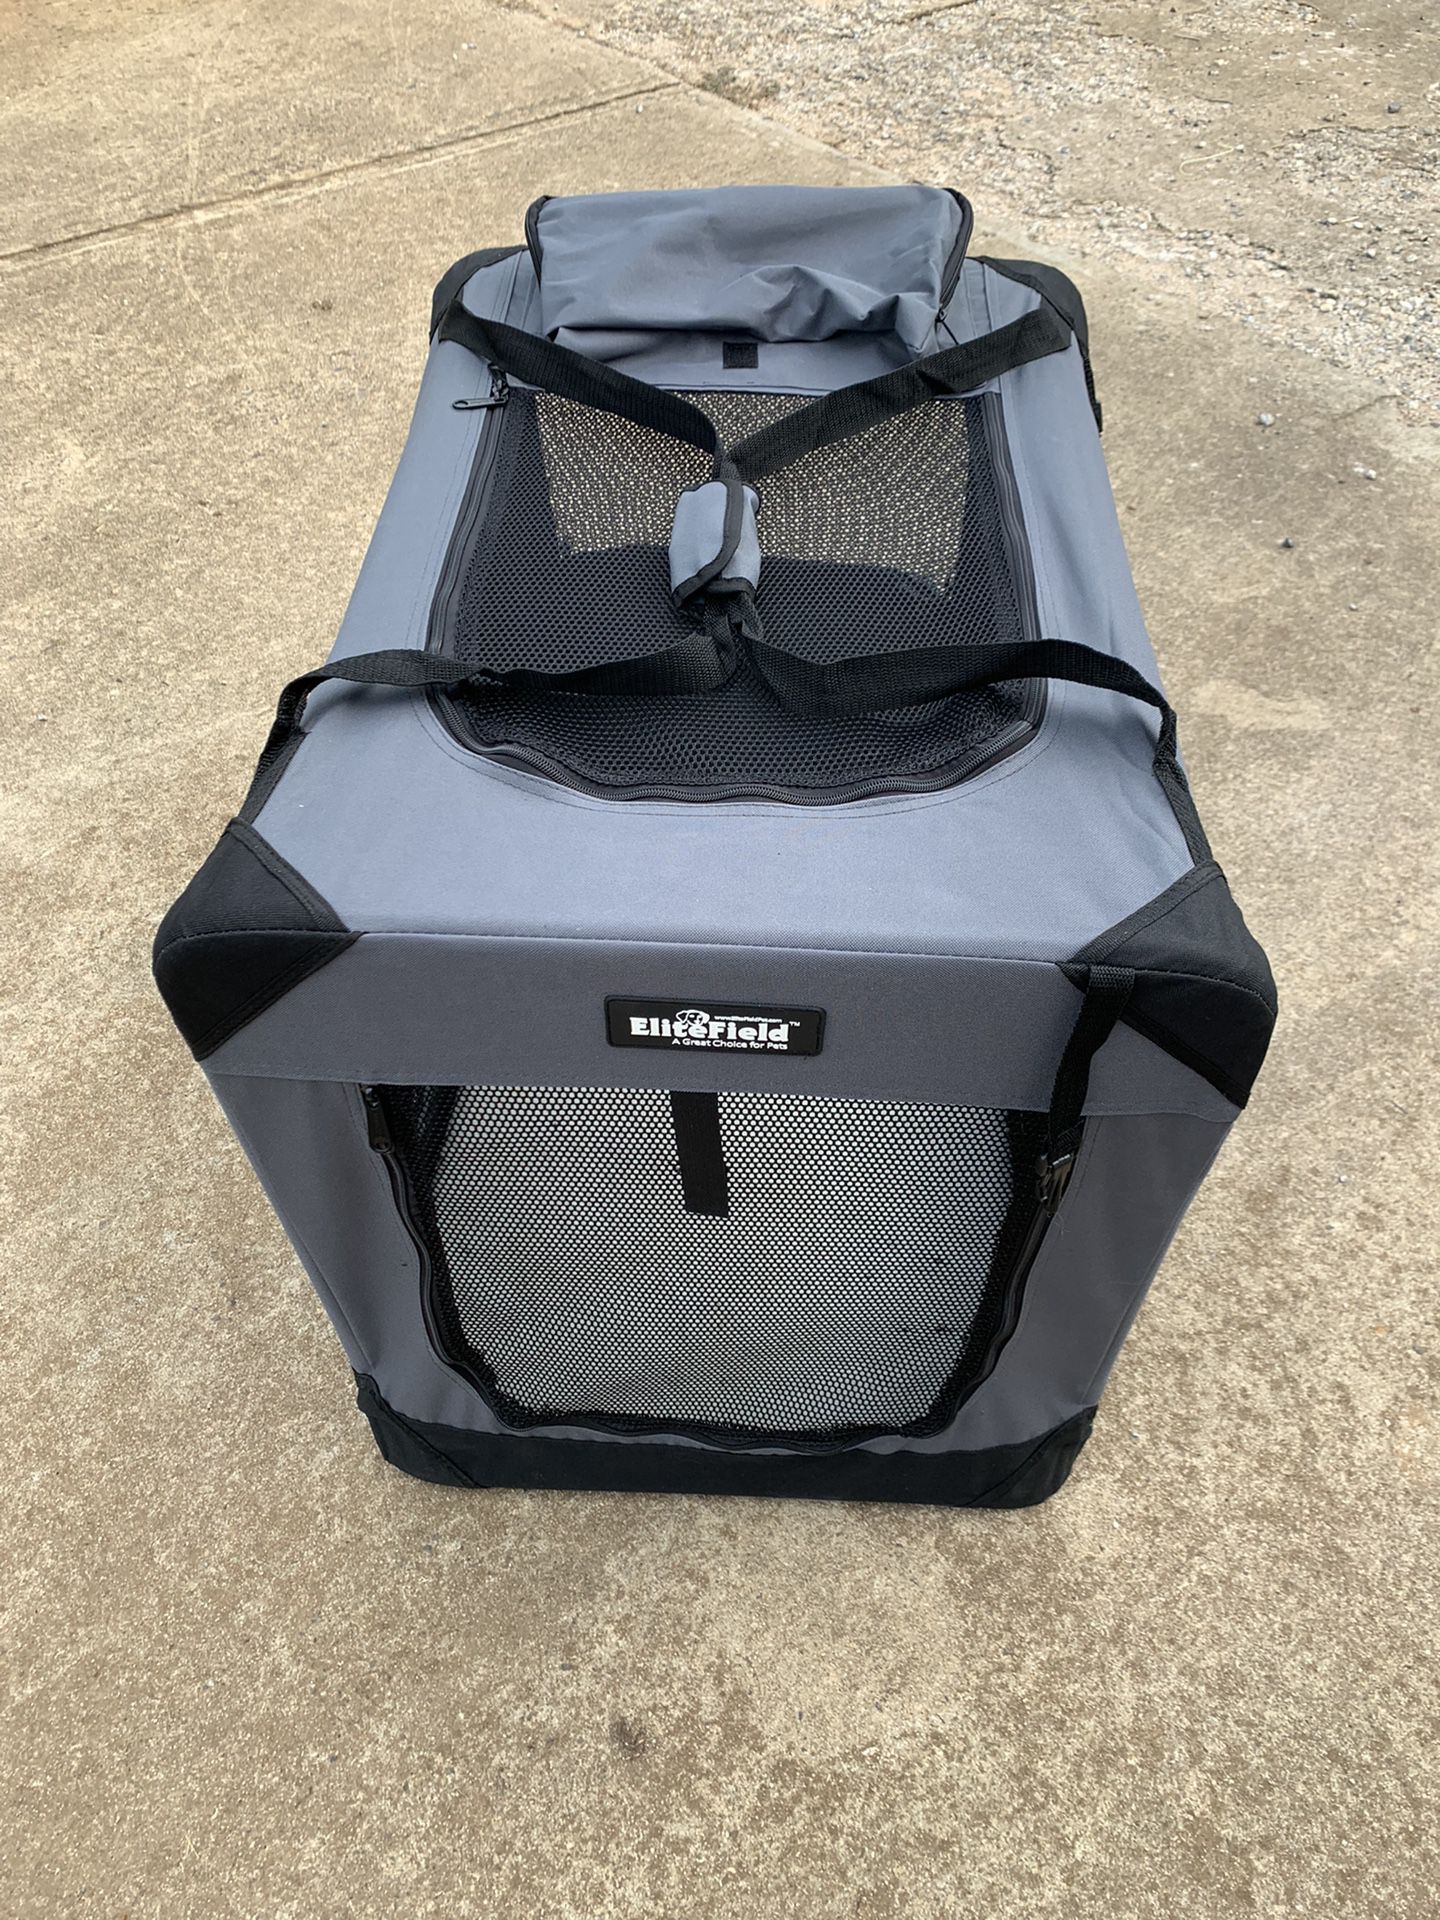 Elitefield Large Dog Soft Crate